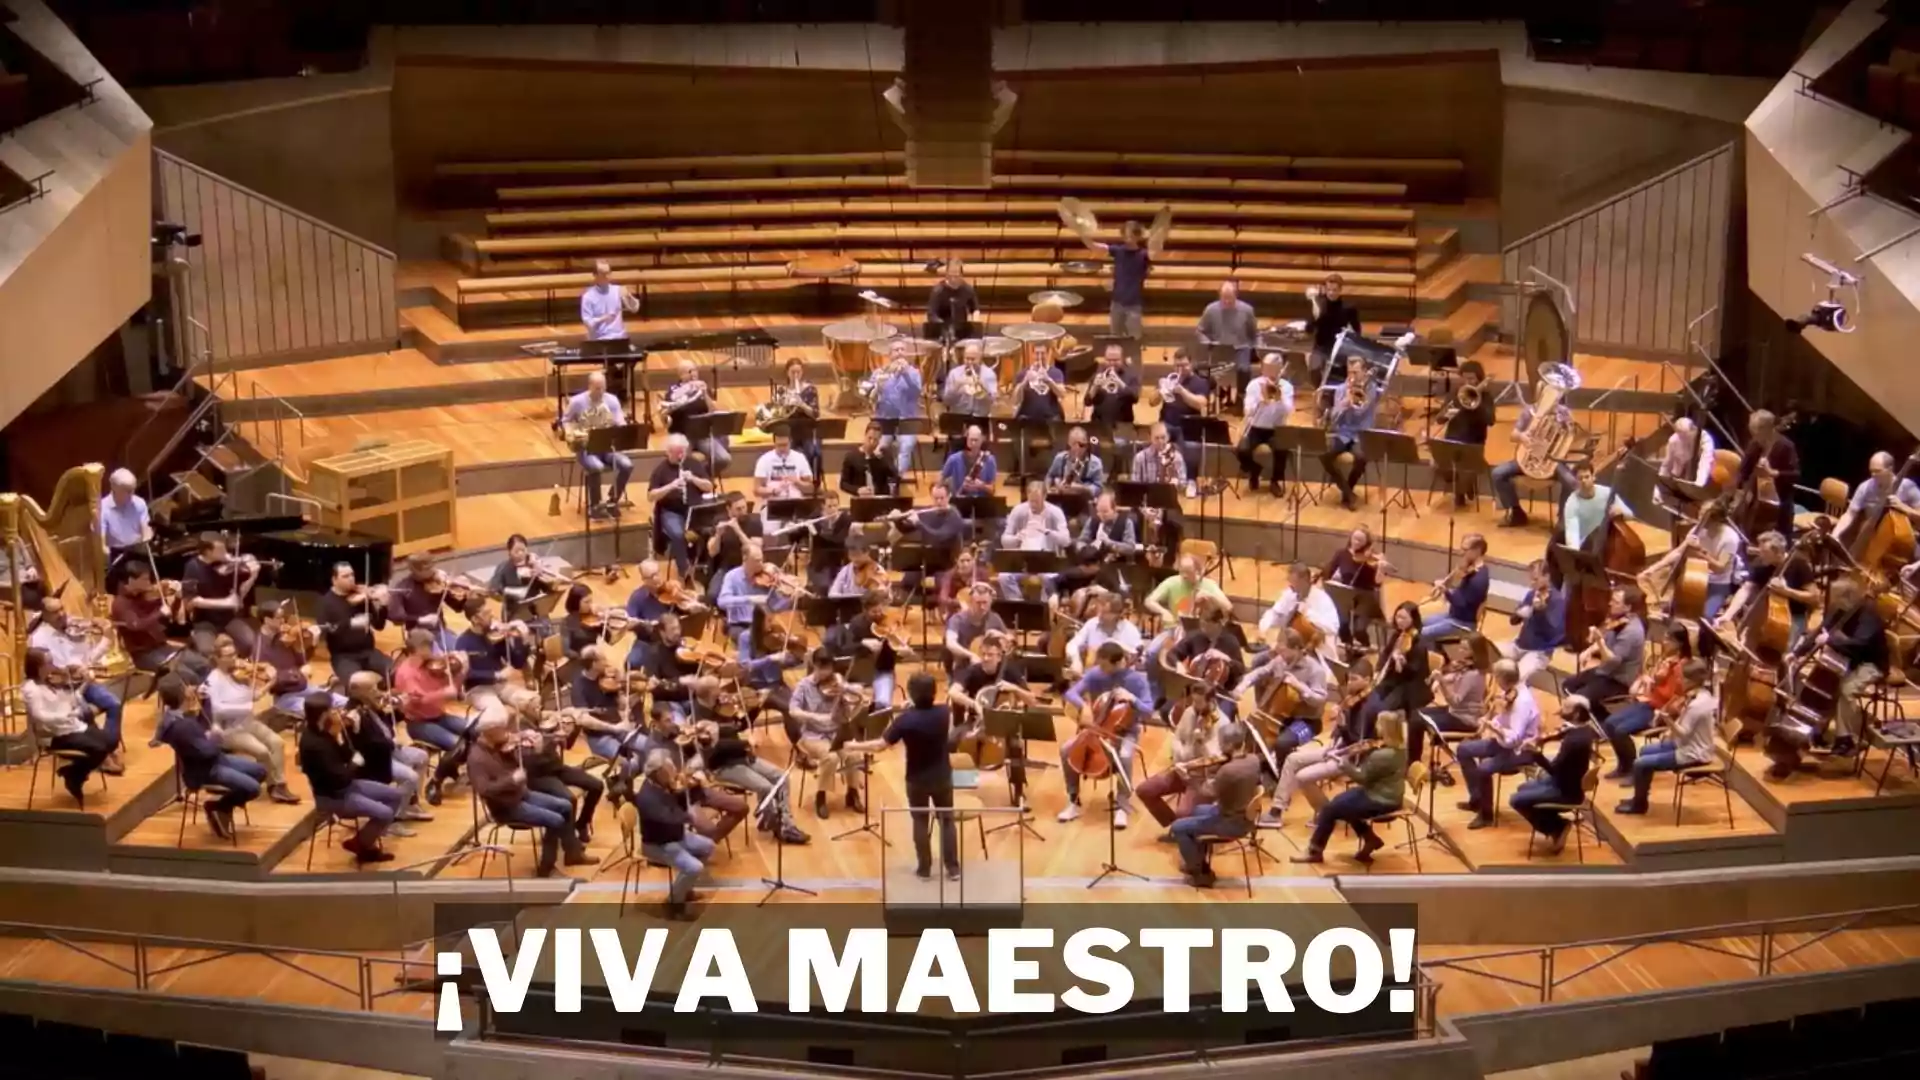 ¡Viva Maestro! Wallpaper and Images